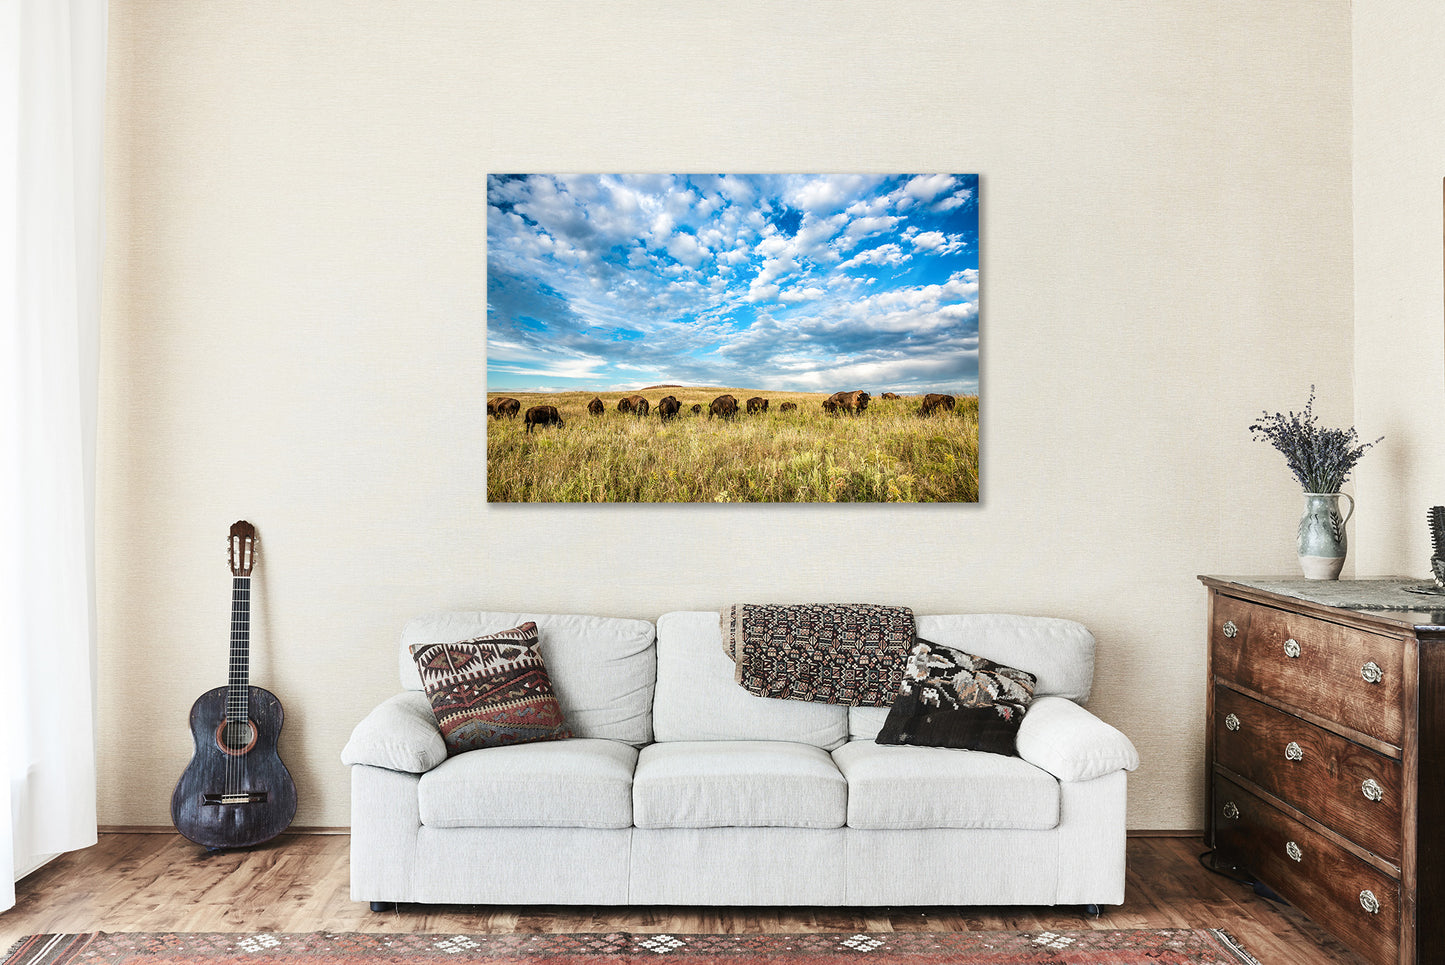 Bison Metal Print (Ready to Hang) Photo of Buffalo Herd on Tallgrass Prairie in Oklahoma Great Plains Wall Art Western Decor